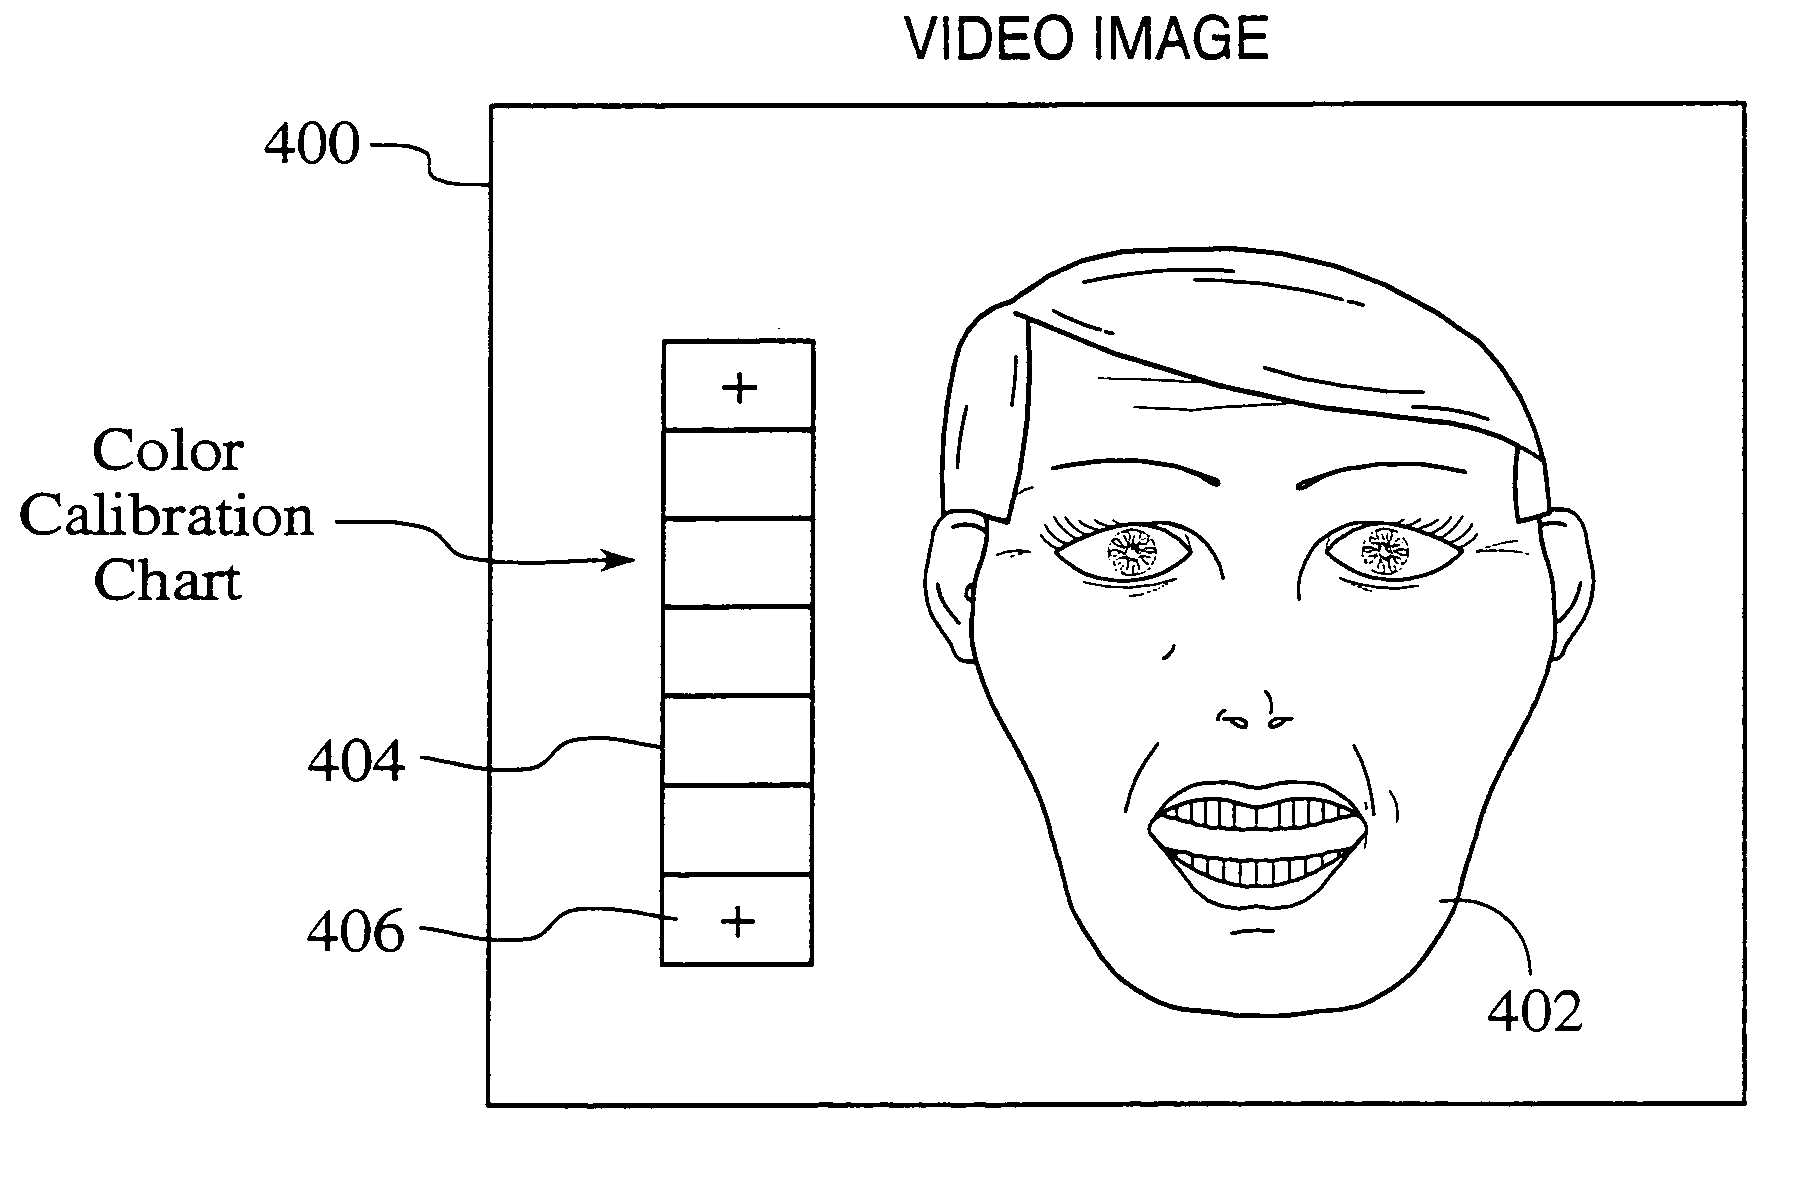 Methods for determining color or shade information of a dental object using an image generation device without operator identification of the position of a reference implement in the field of view of the image generation device